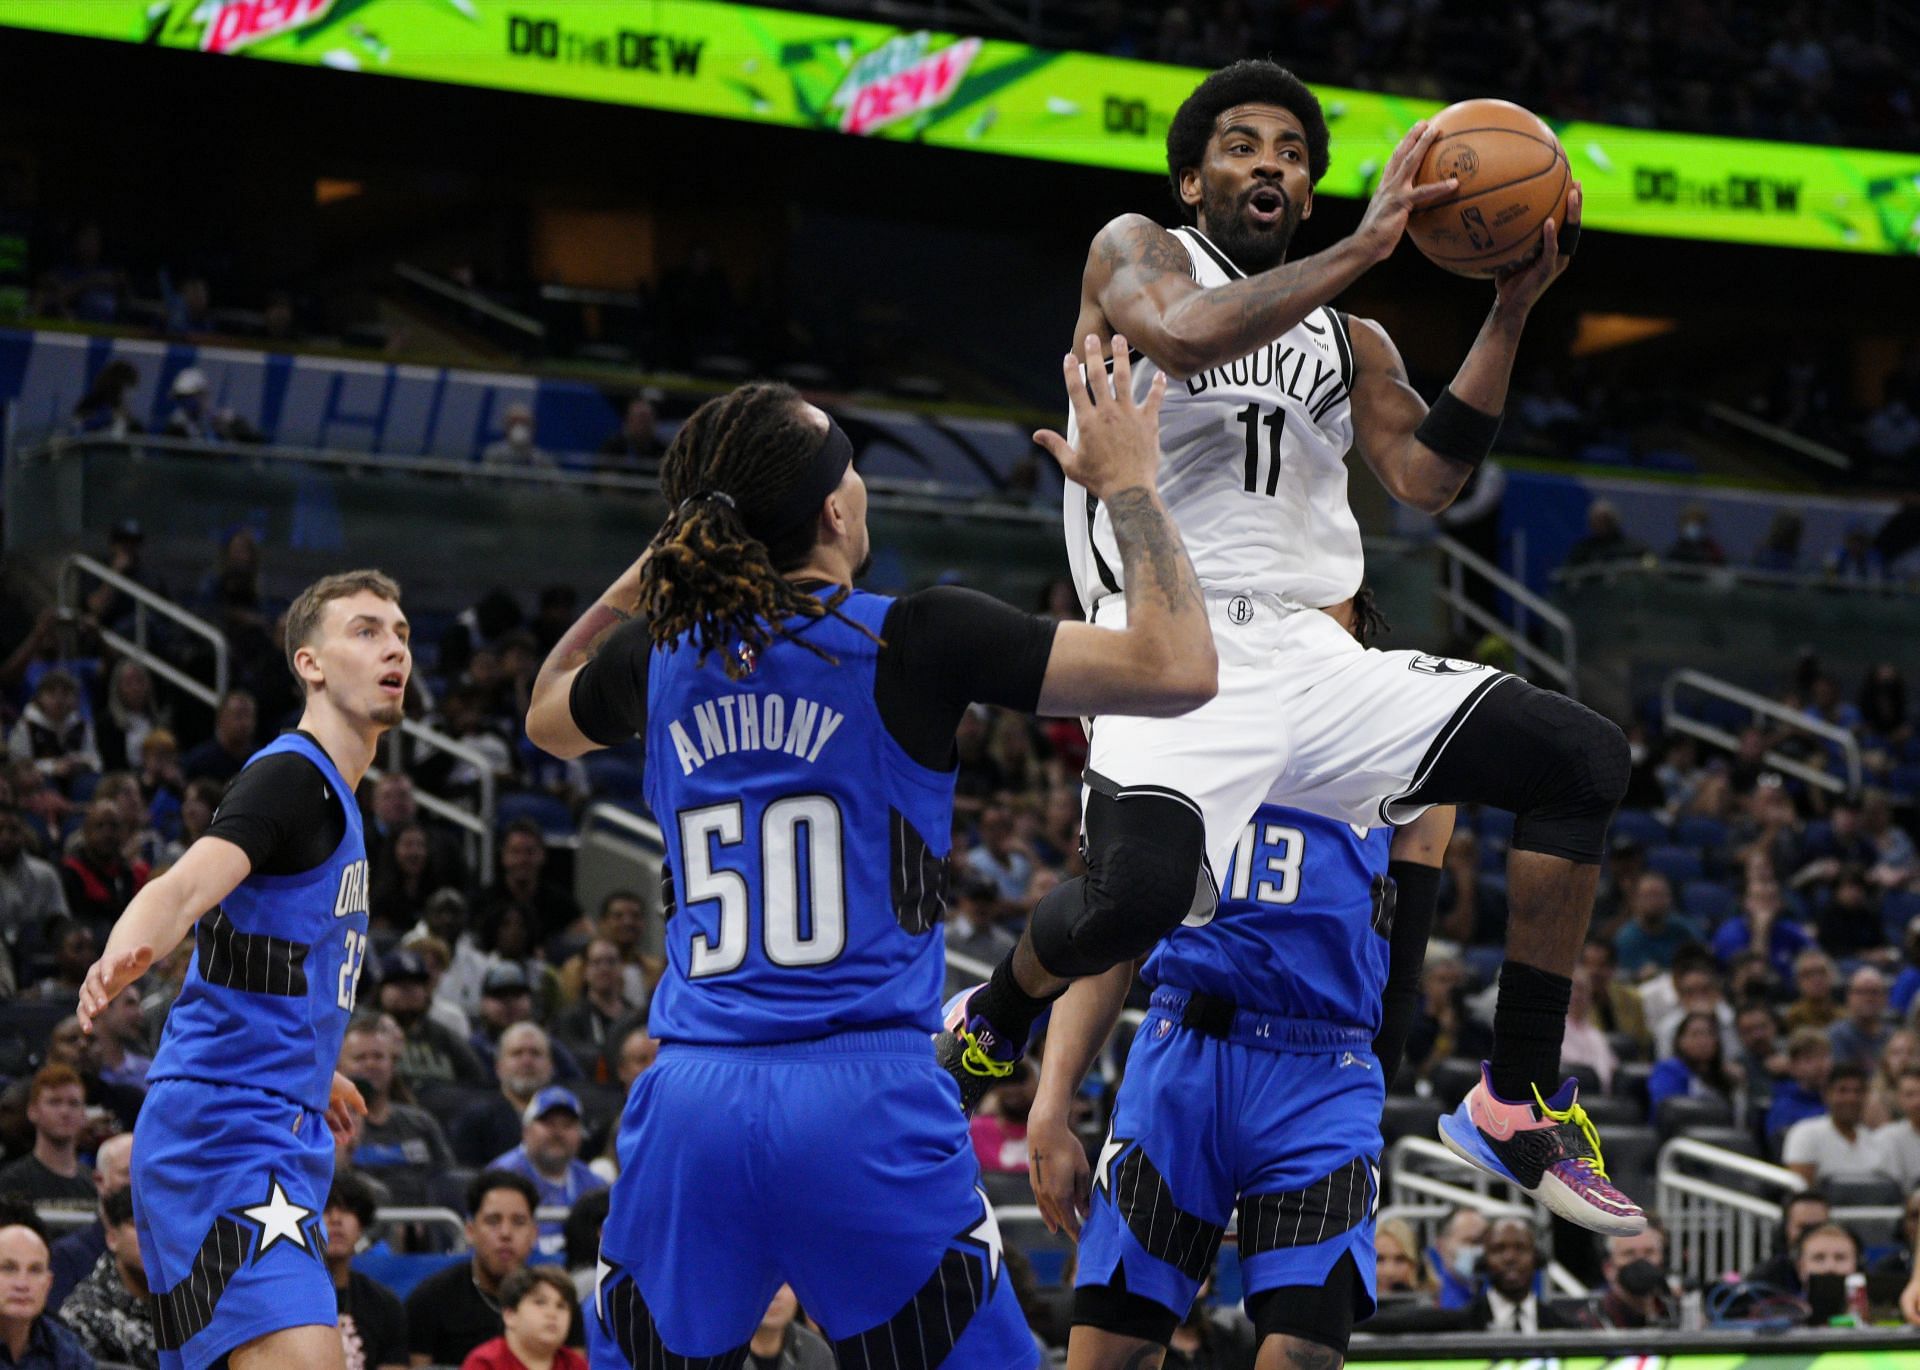 Kyrie Irving #11 of the Brooklyn Nets drives to the basket against the Orlando Magic.